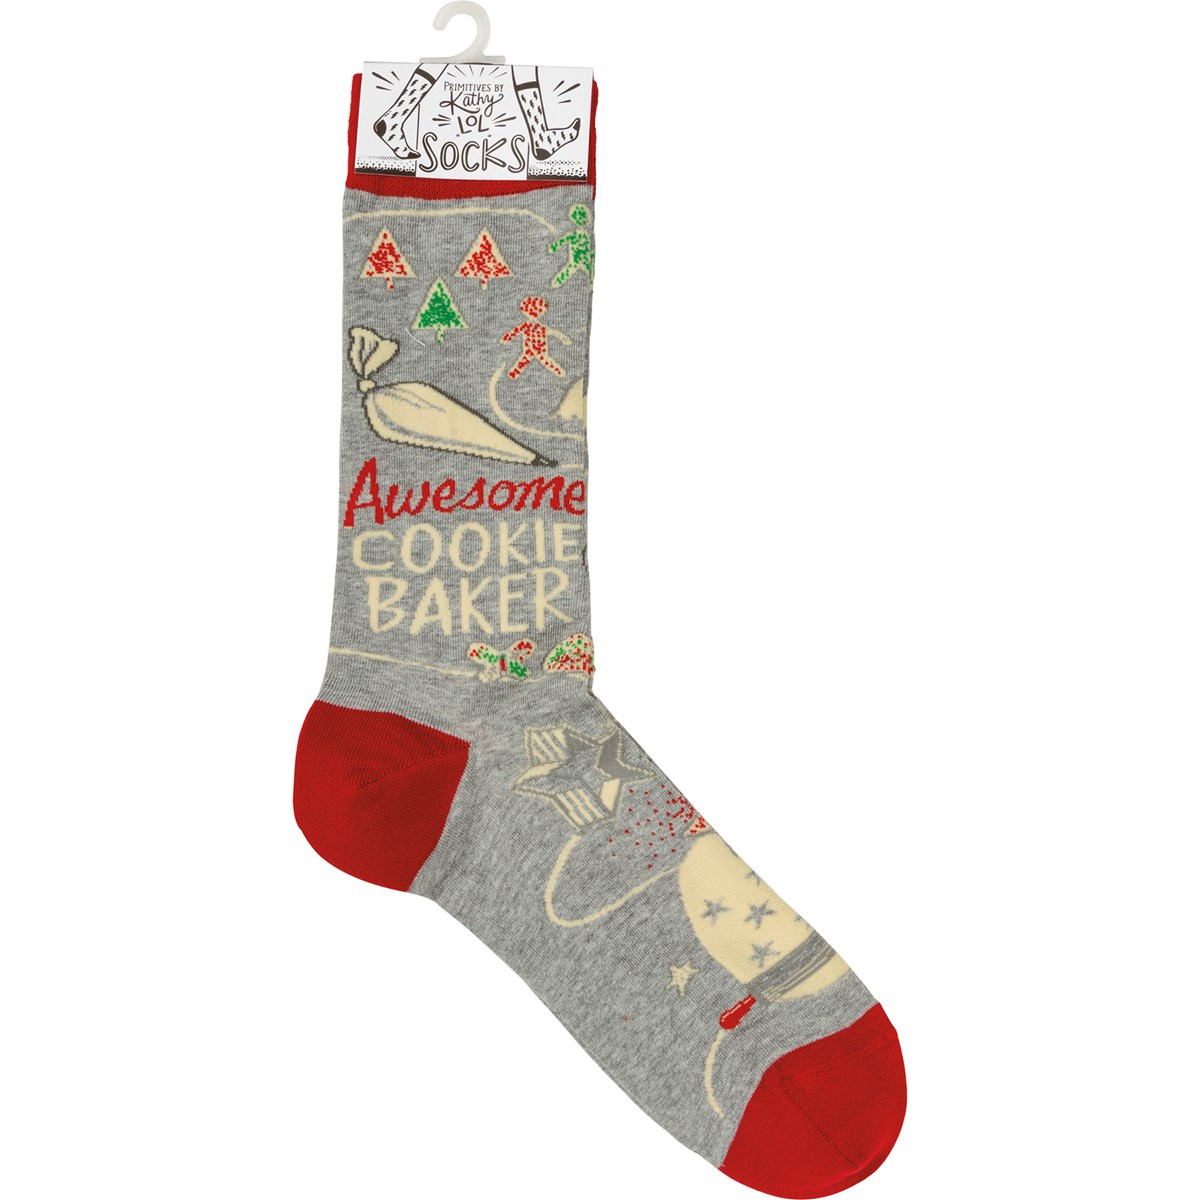 Awesome Cookie Baker Socks - Cotton, Nylon, Spandex